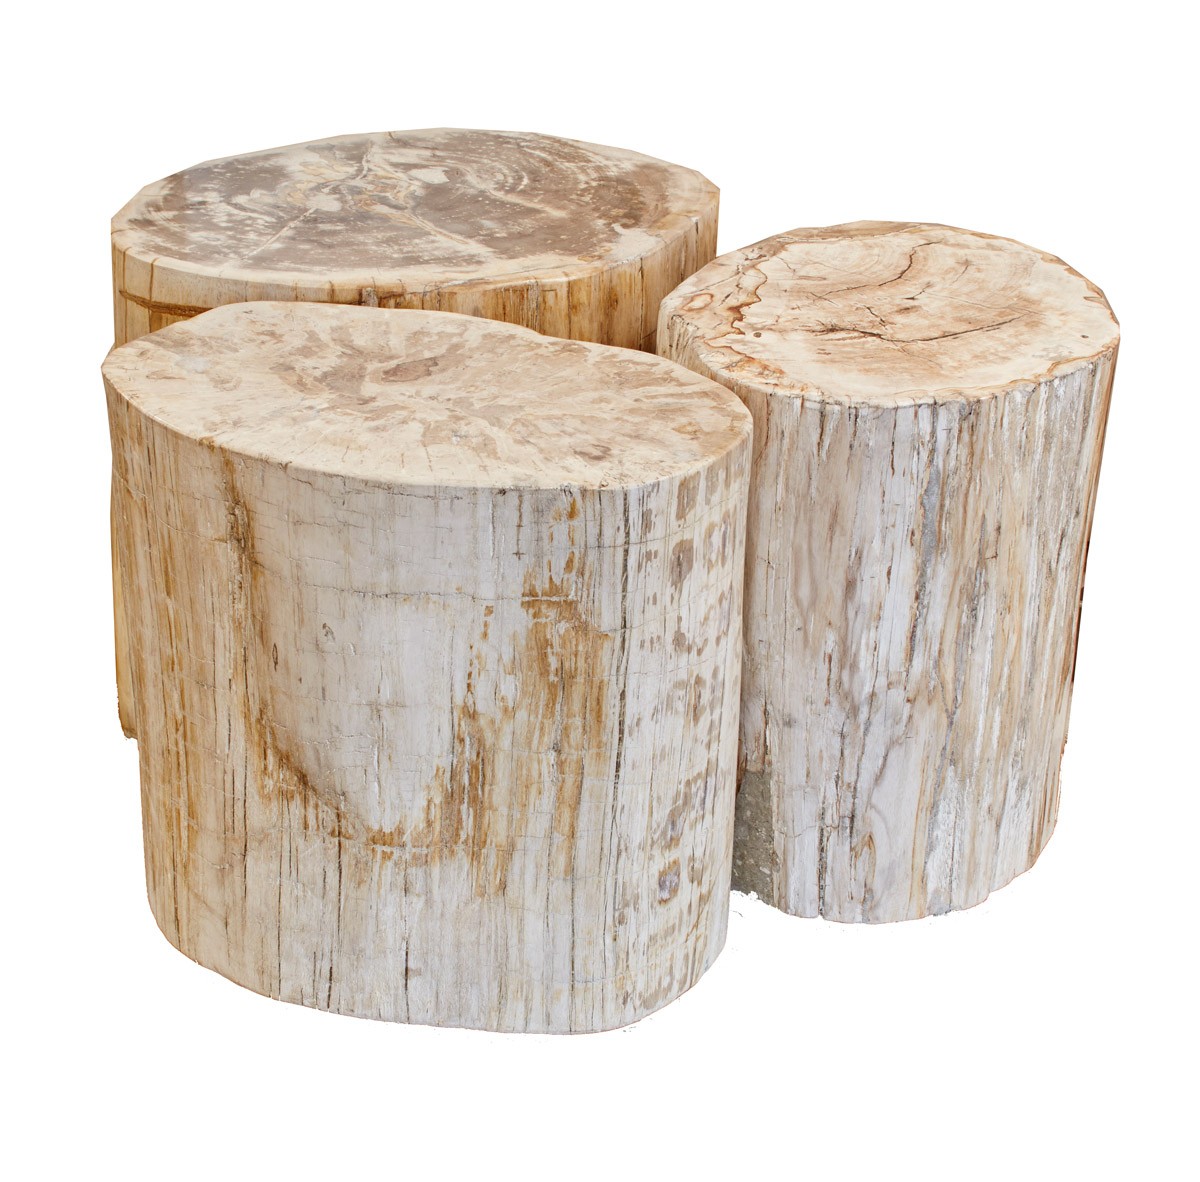 blond petrified wood stool full polish jalan timor trunk accent table glass lamp shades for lamps west elm morten ikea bedroom storage ideas chairside with attached cherry coffee